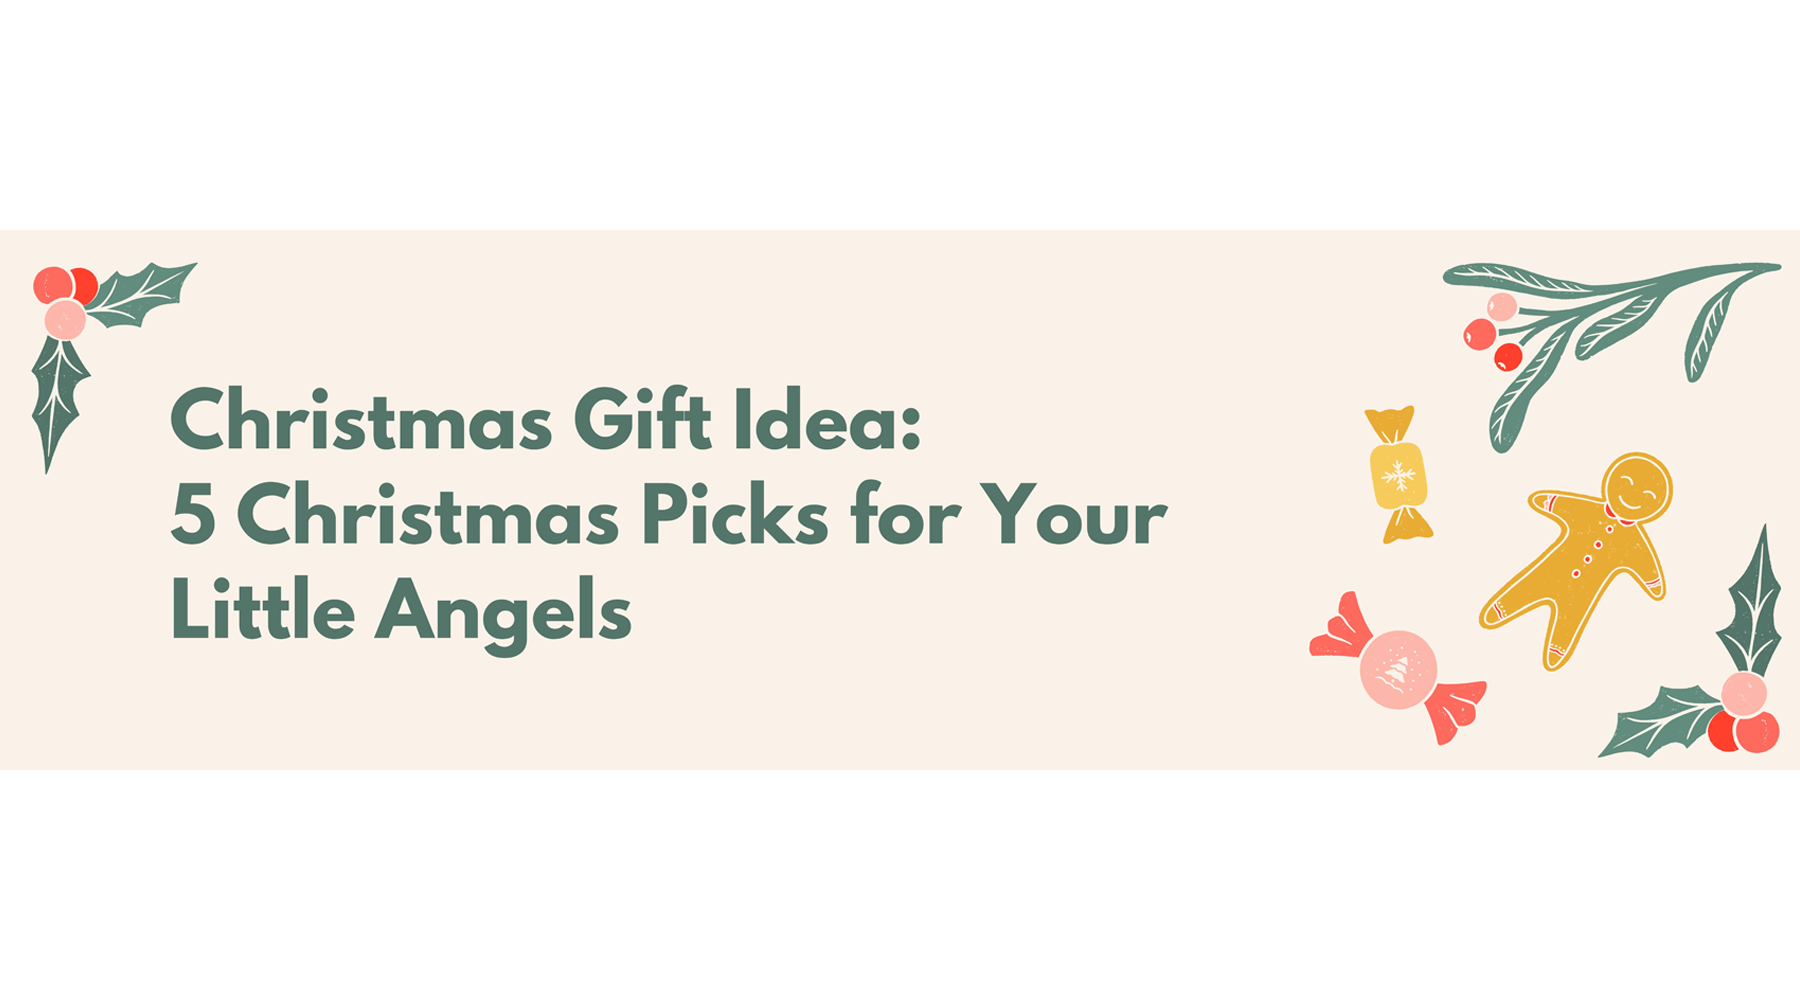 Christmas Gift Idea: 5 Christmas Picks for Your Little Angels